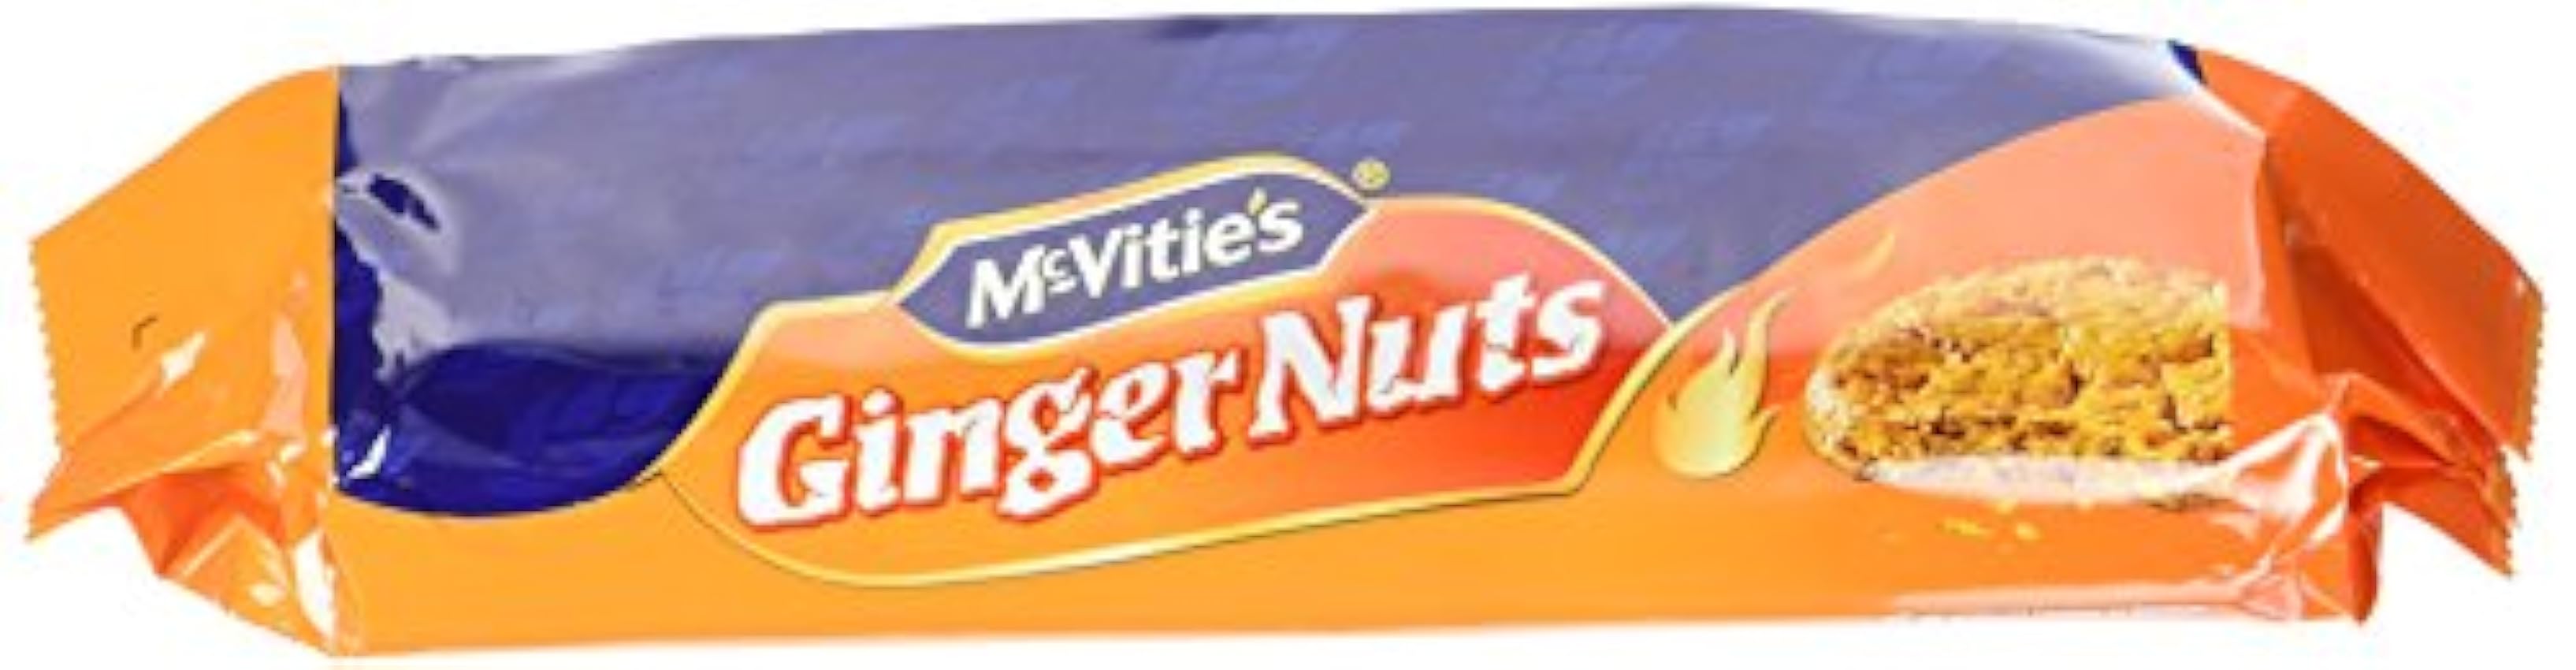 MC VITIES Biscuit Ginger Nuts Biscuits au Gingembre 250